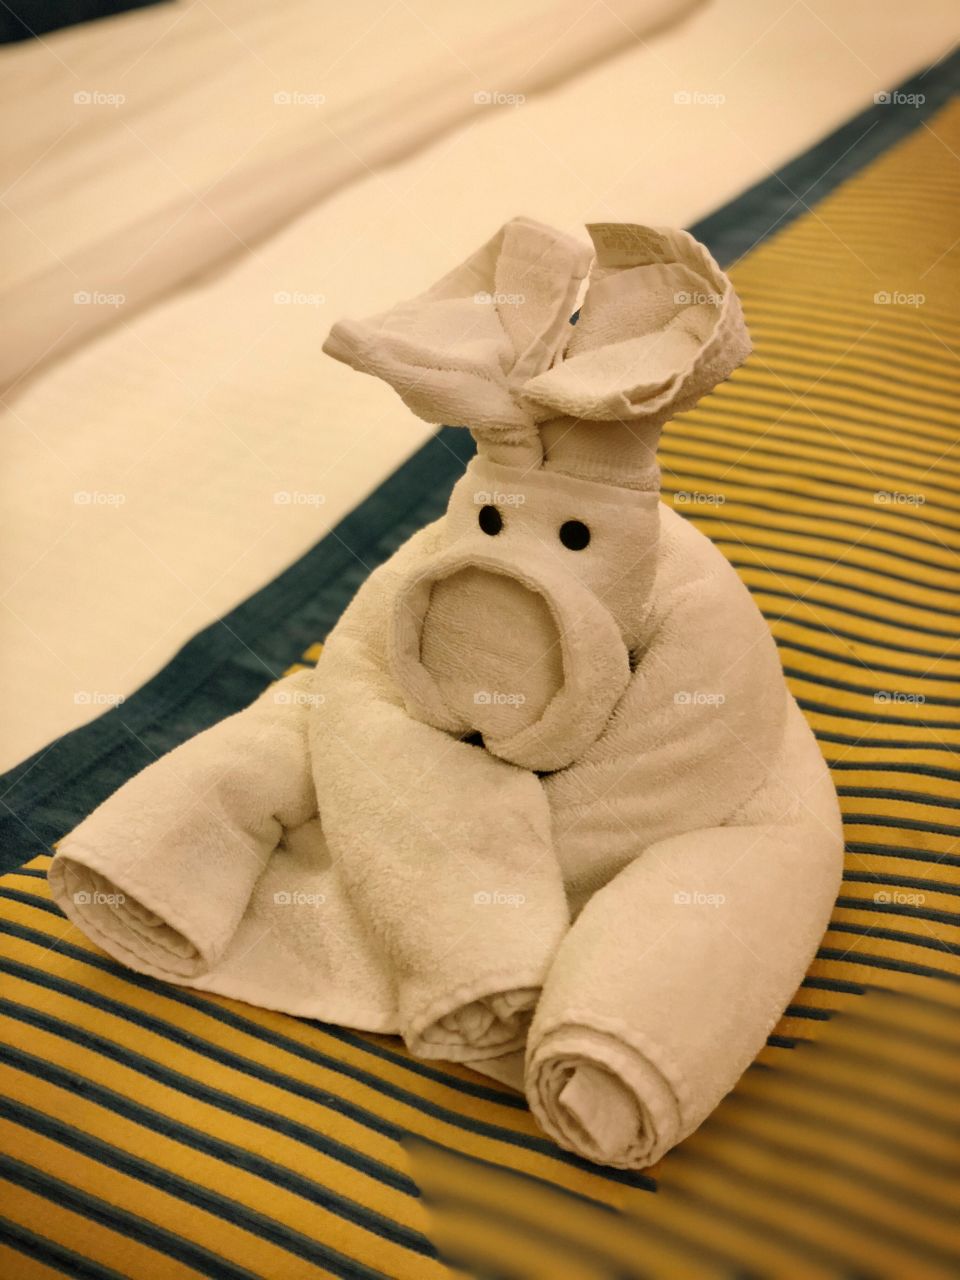 Carnival Sunshine Cruise towel animal made by our room Stuart